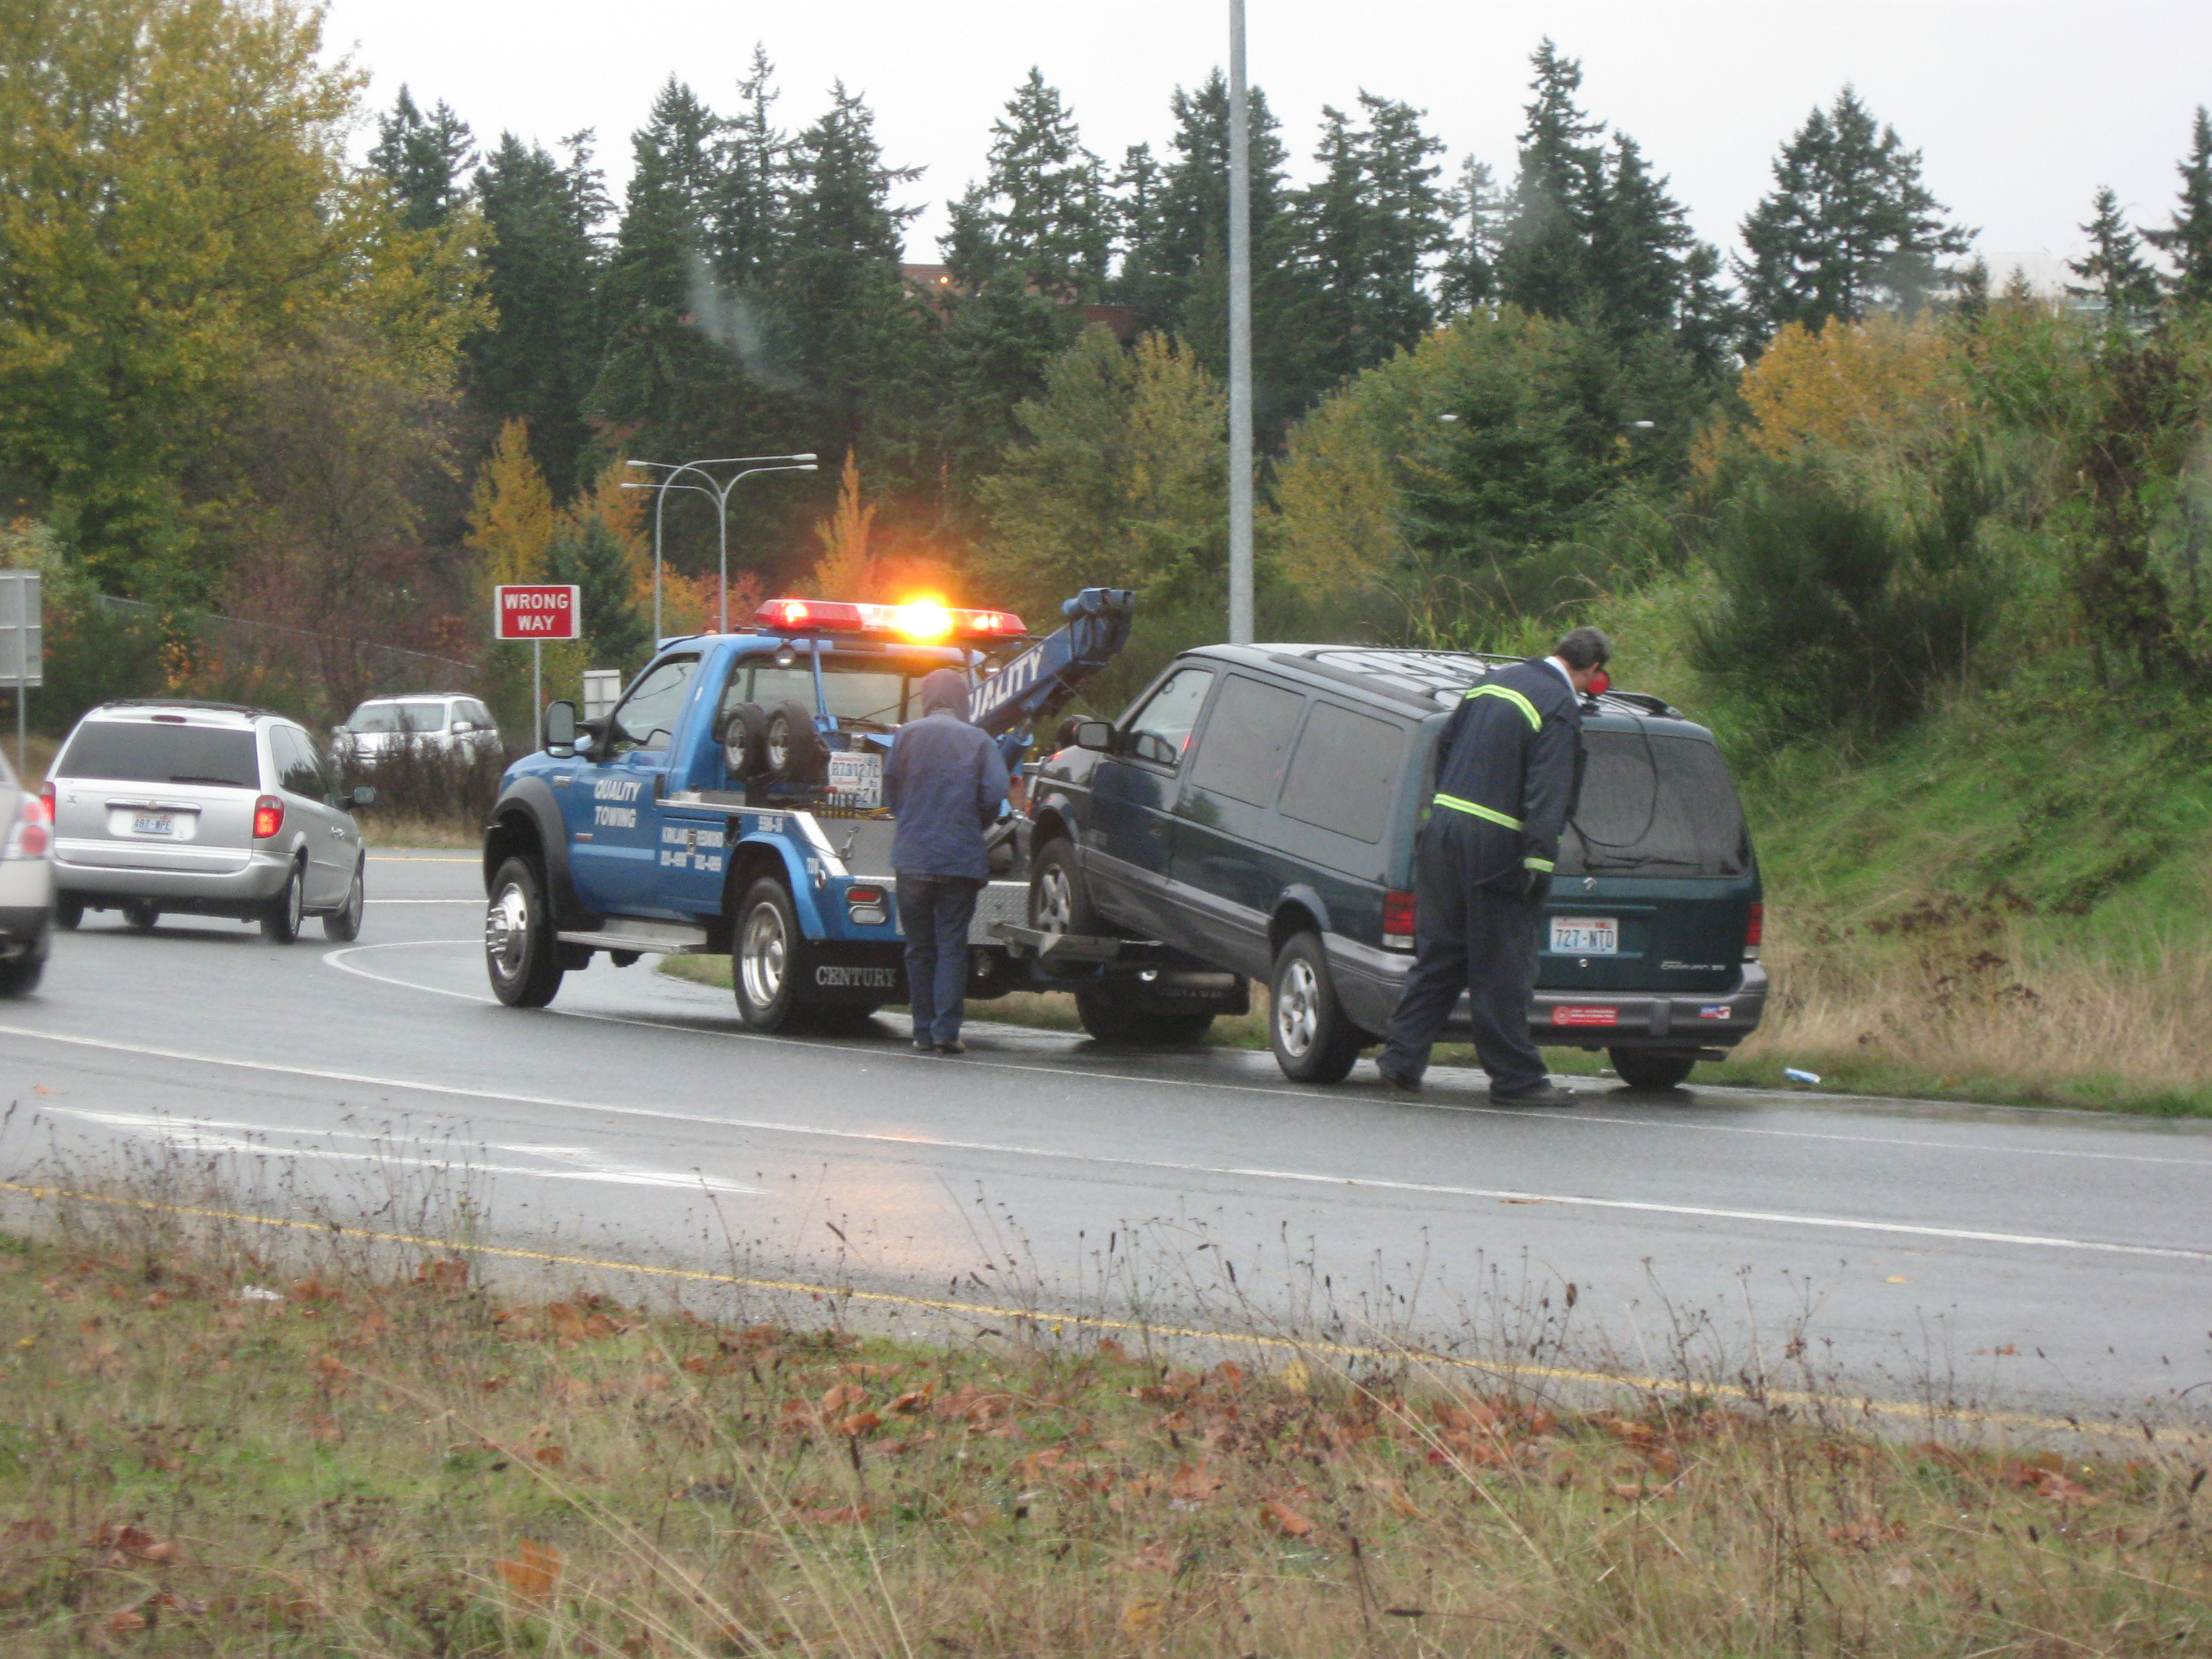 Tow truck towing photo